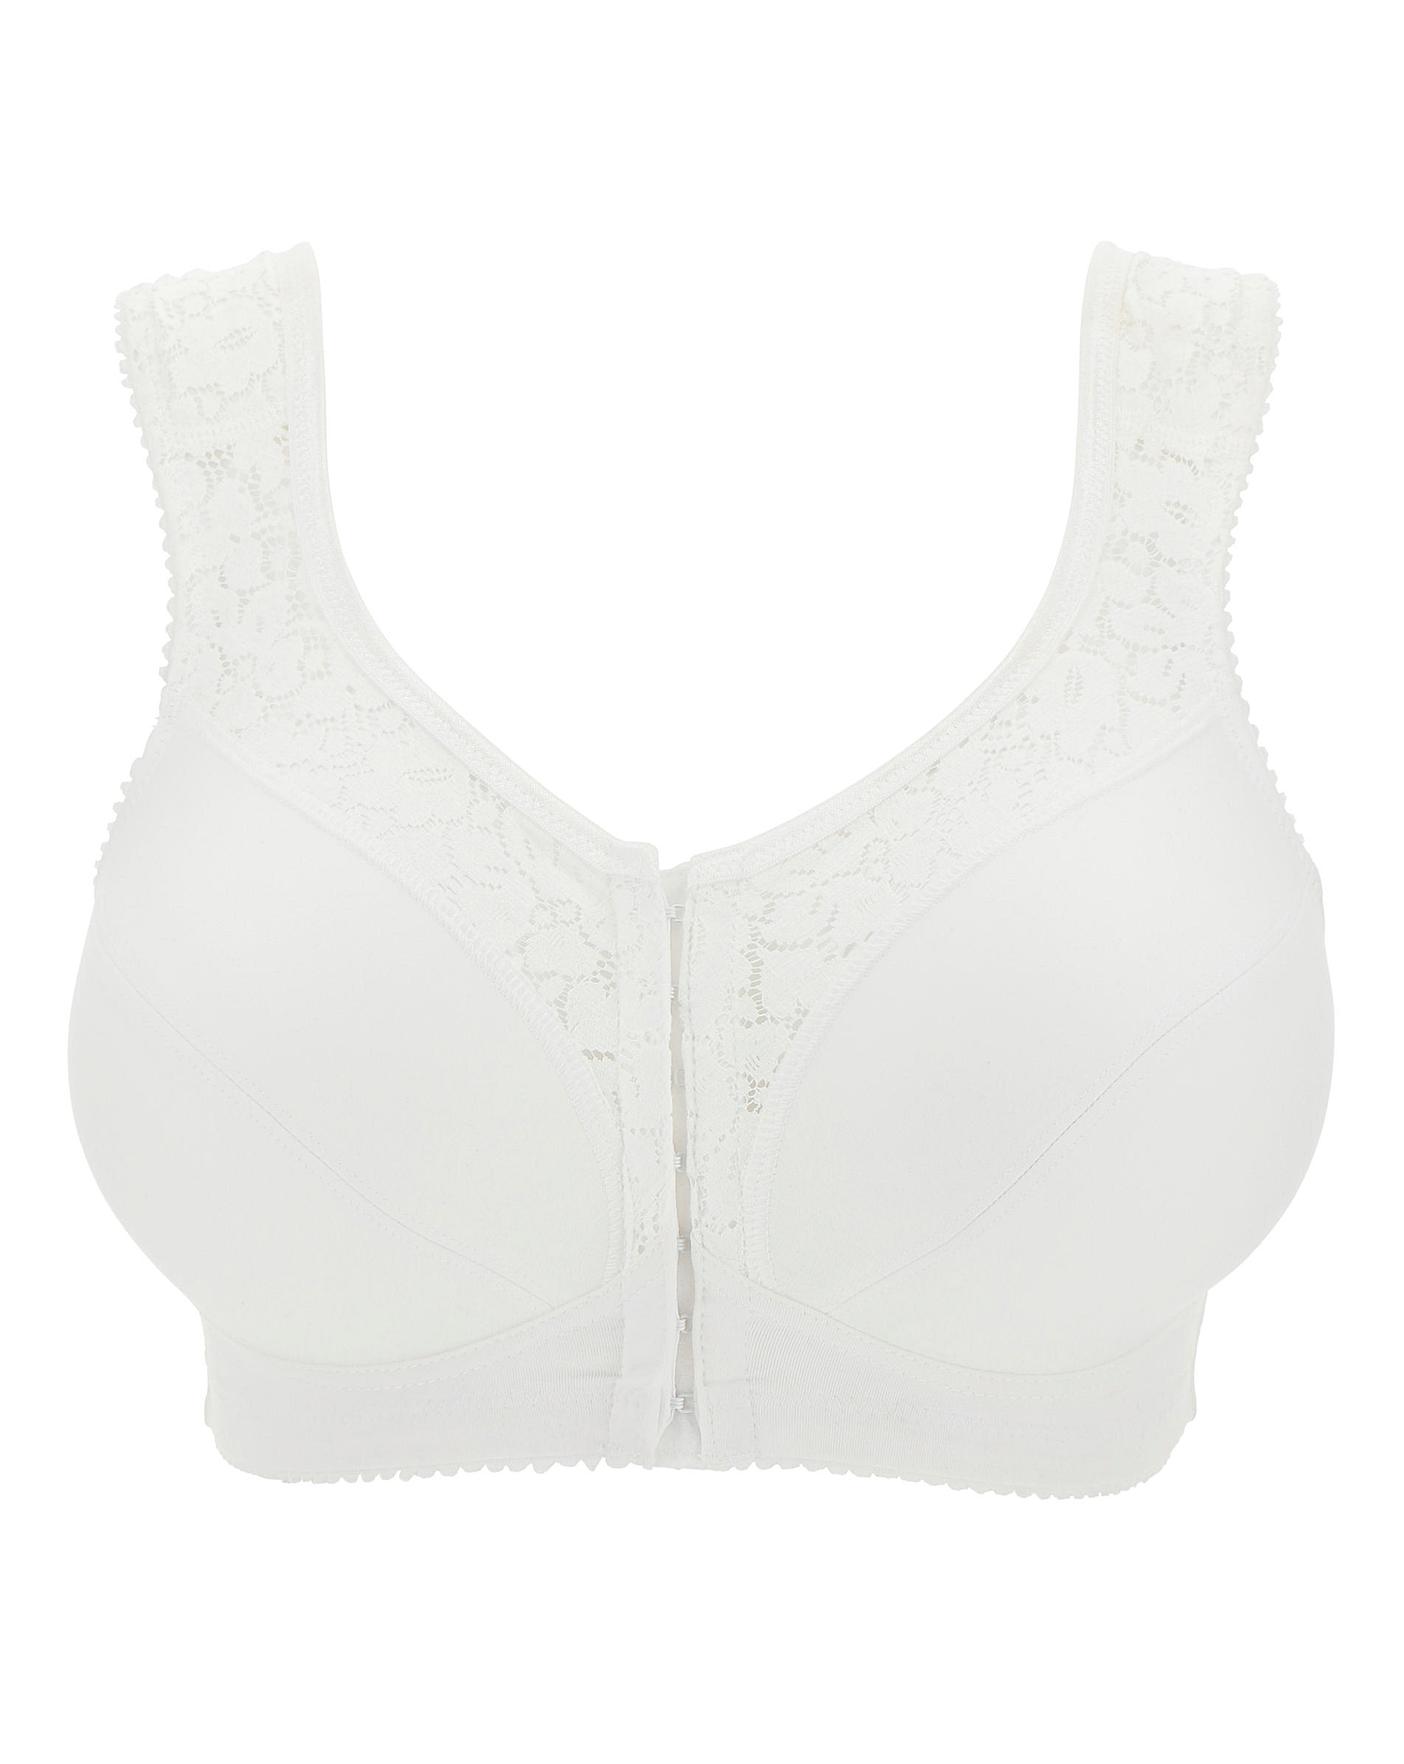 Miss Mary Cotton Lace F/F Bra White  Bra, Miss mary, Front fastening bras